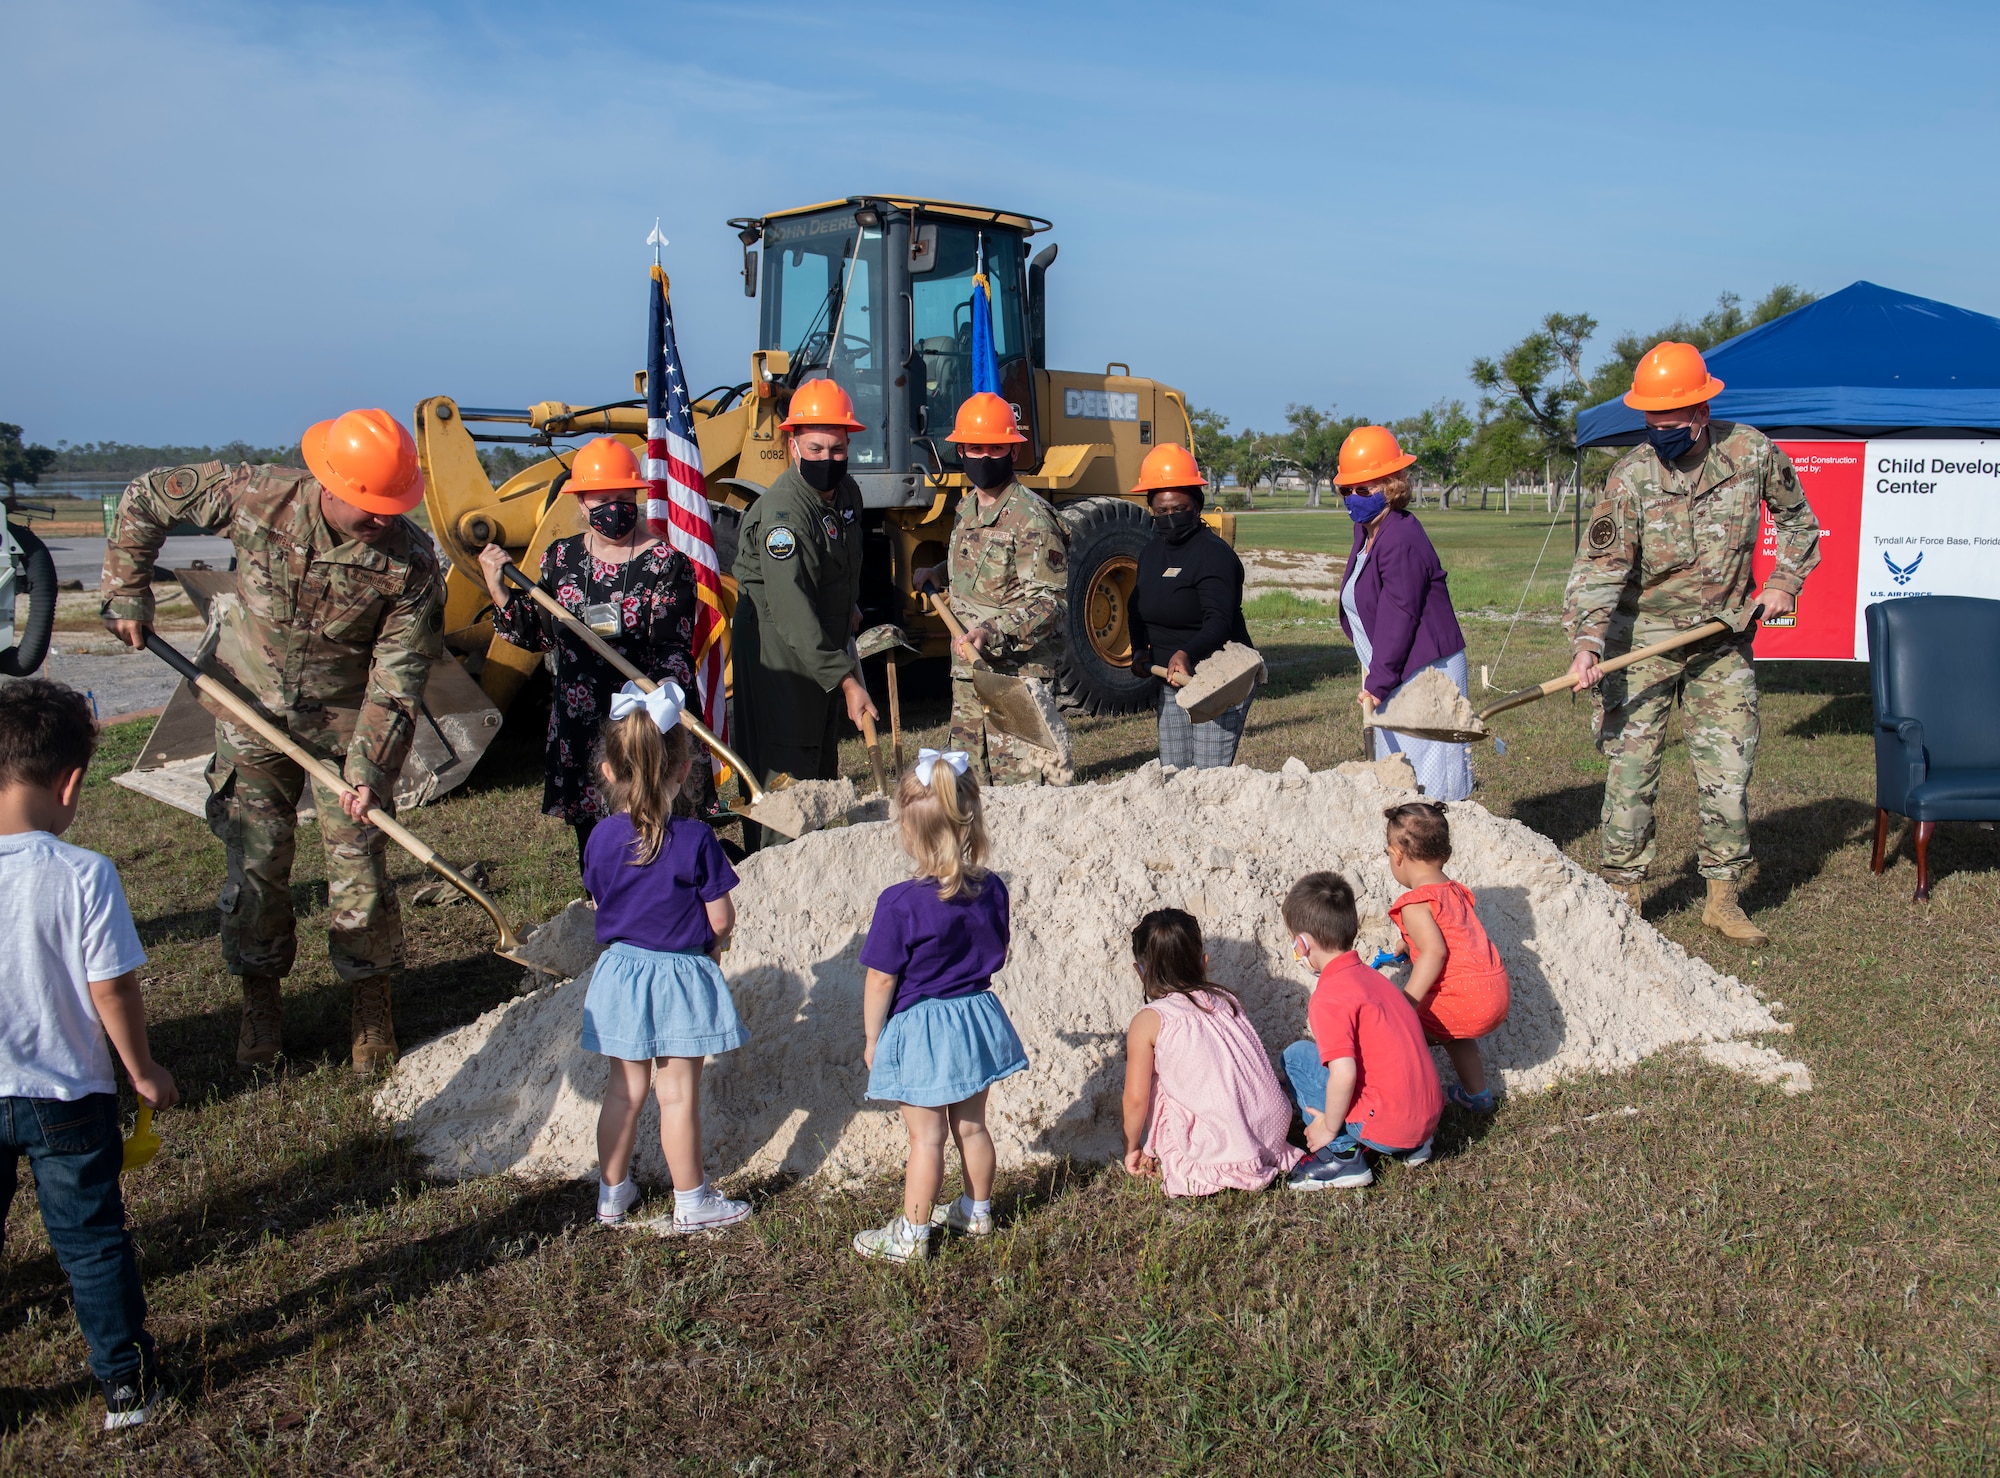 A group participates in a ground breaking ceremony